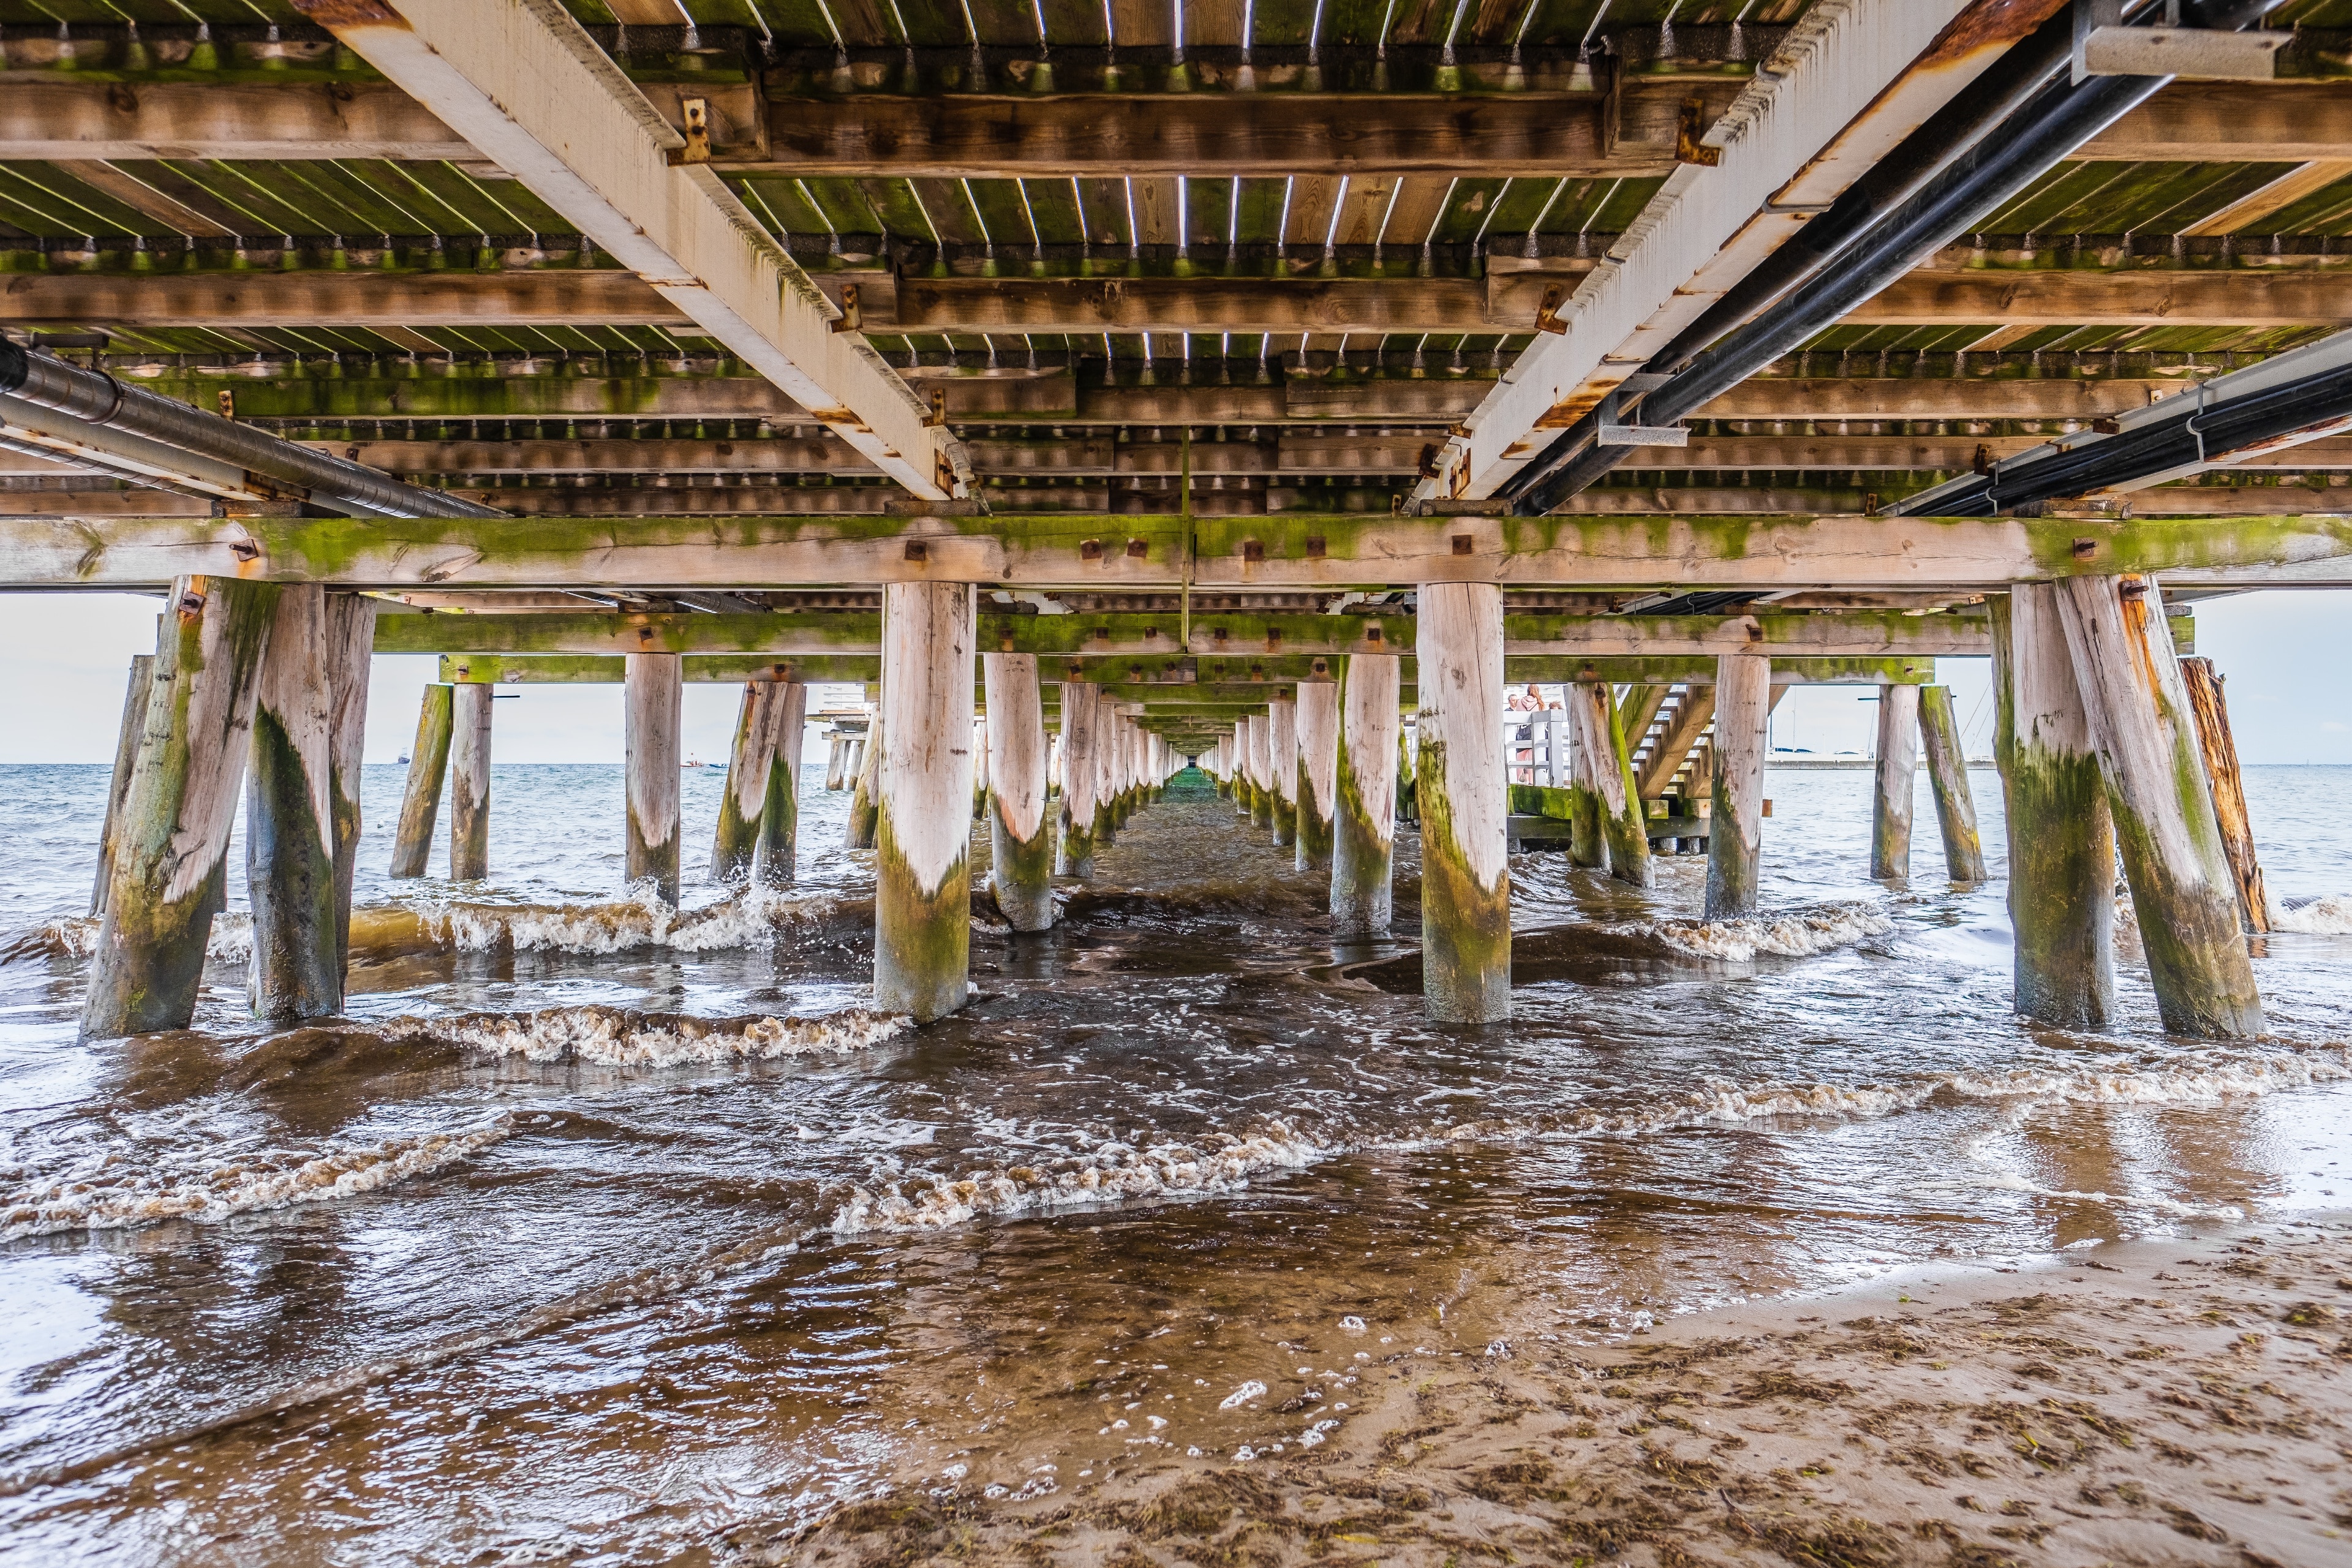 When the top of the pier is too busy during the day, take a photo below it !